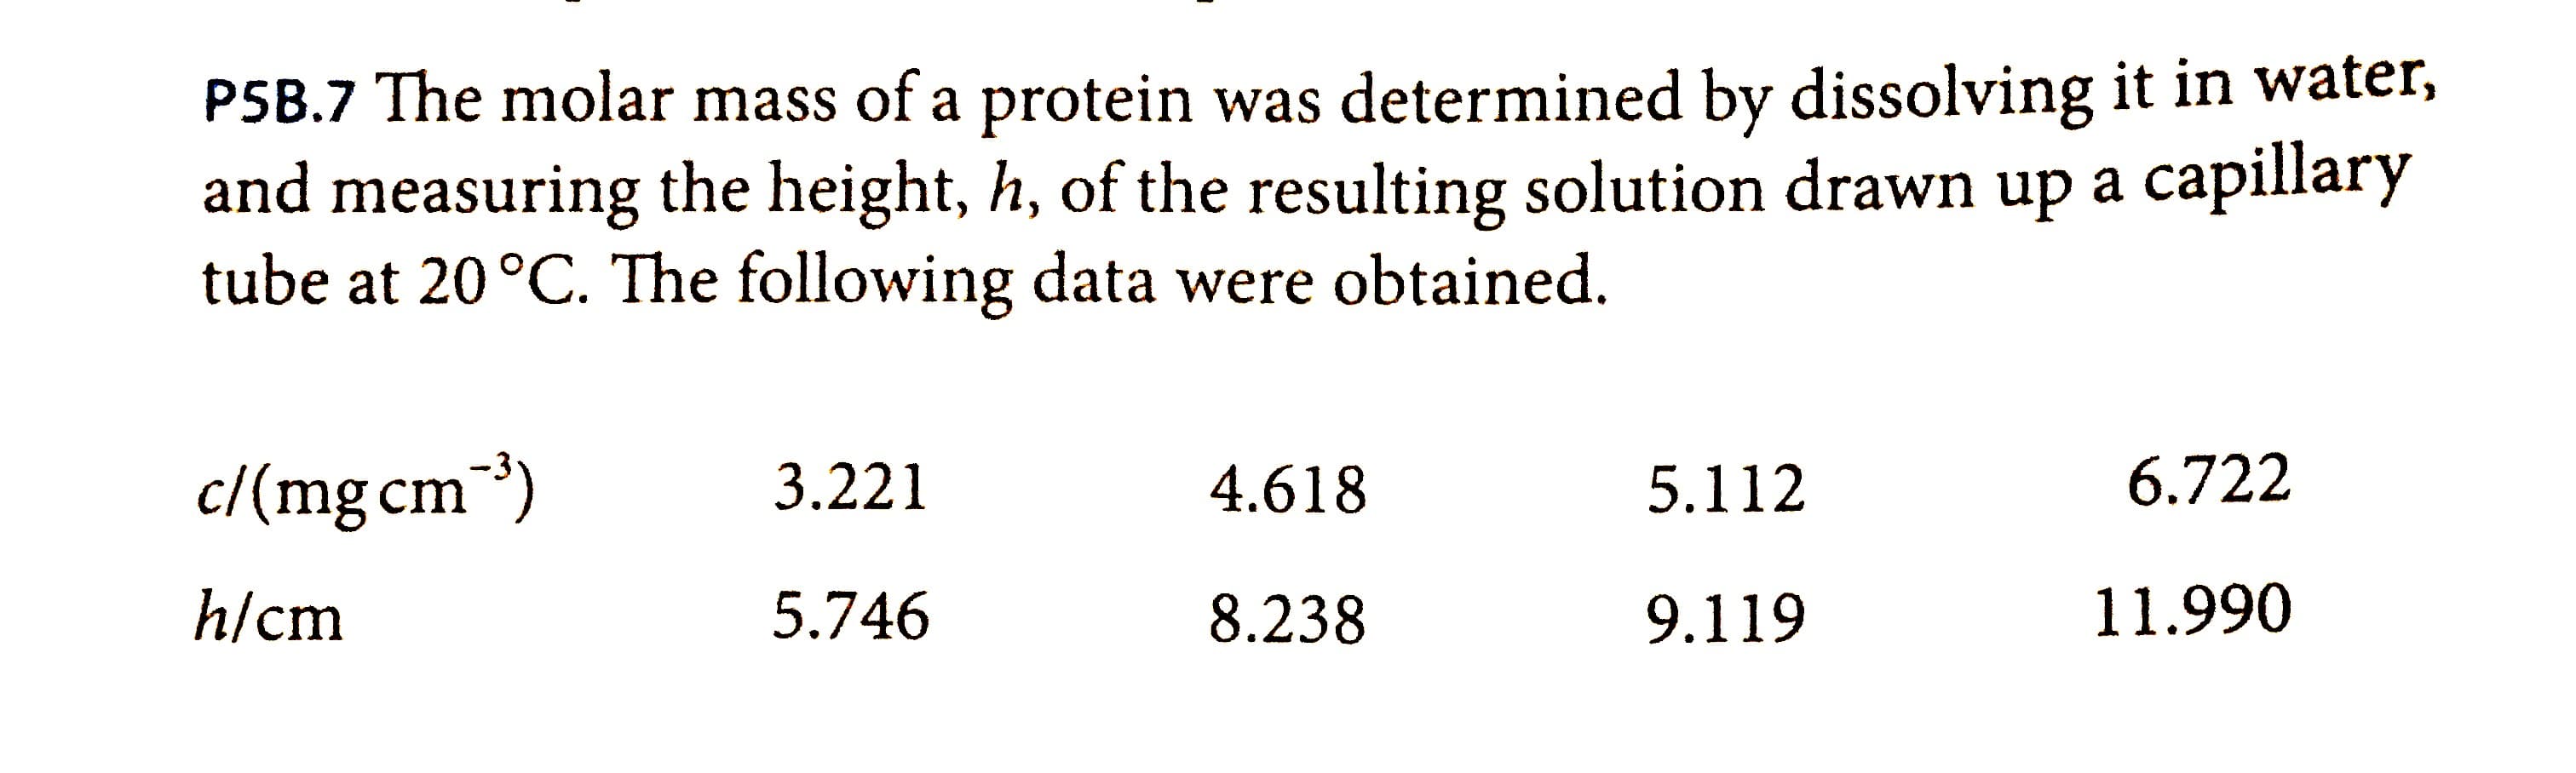 P5B.7 The molar mass of a protein was determined by dissolving it in water,
and measuring the height, h, of the resulting solution drawn up a capillary
tube at 20°C. The following data were obtained.
c/(mg cm)
3.221
4.618
5.112
6.722
h/cm
5.746
8.238
9.119
11.990
